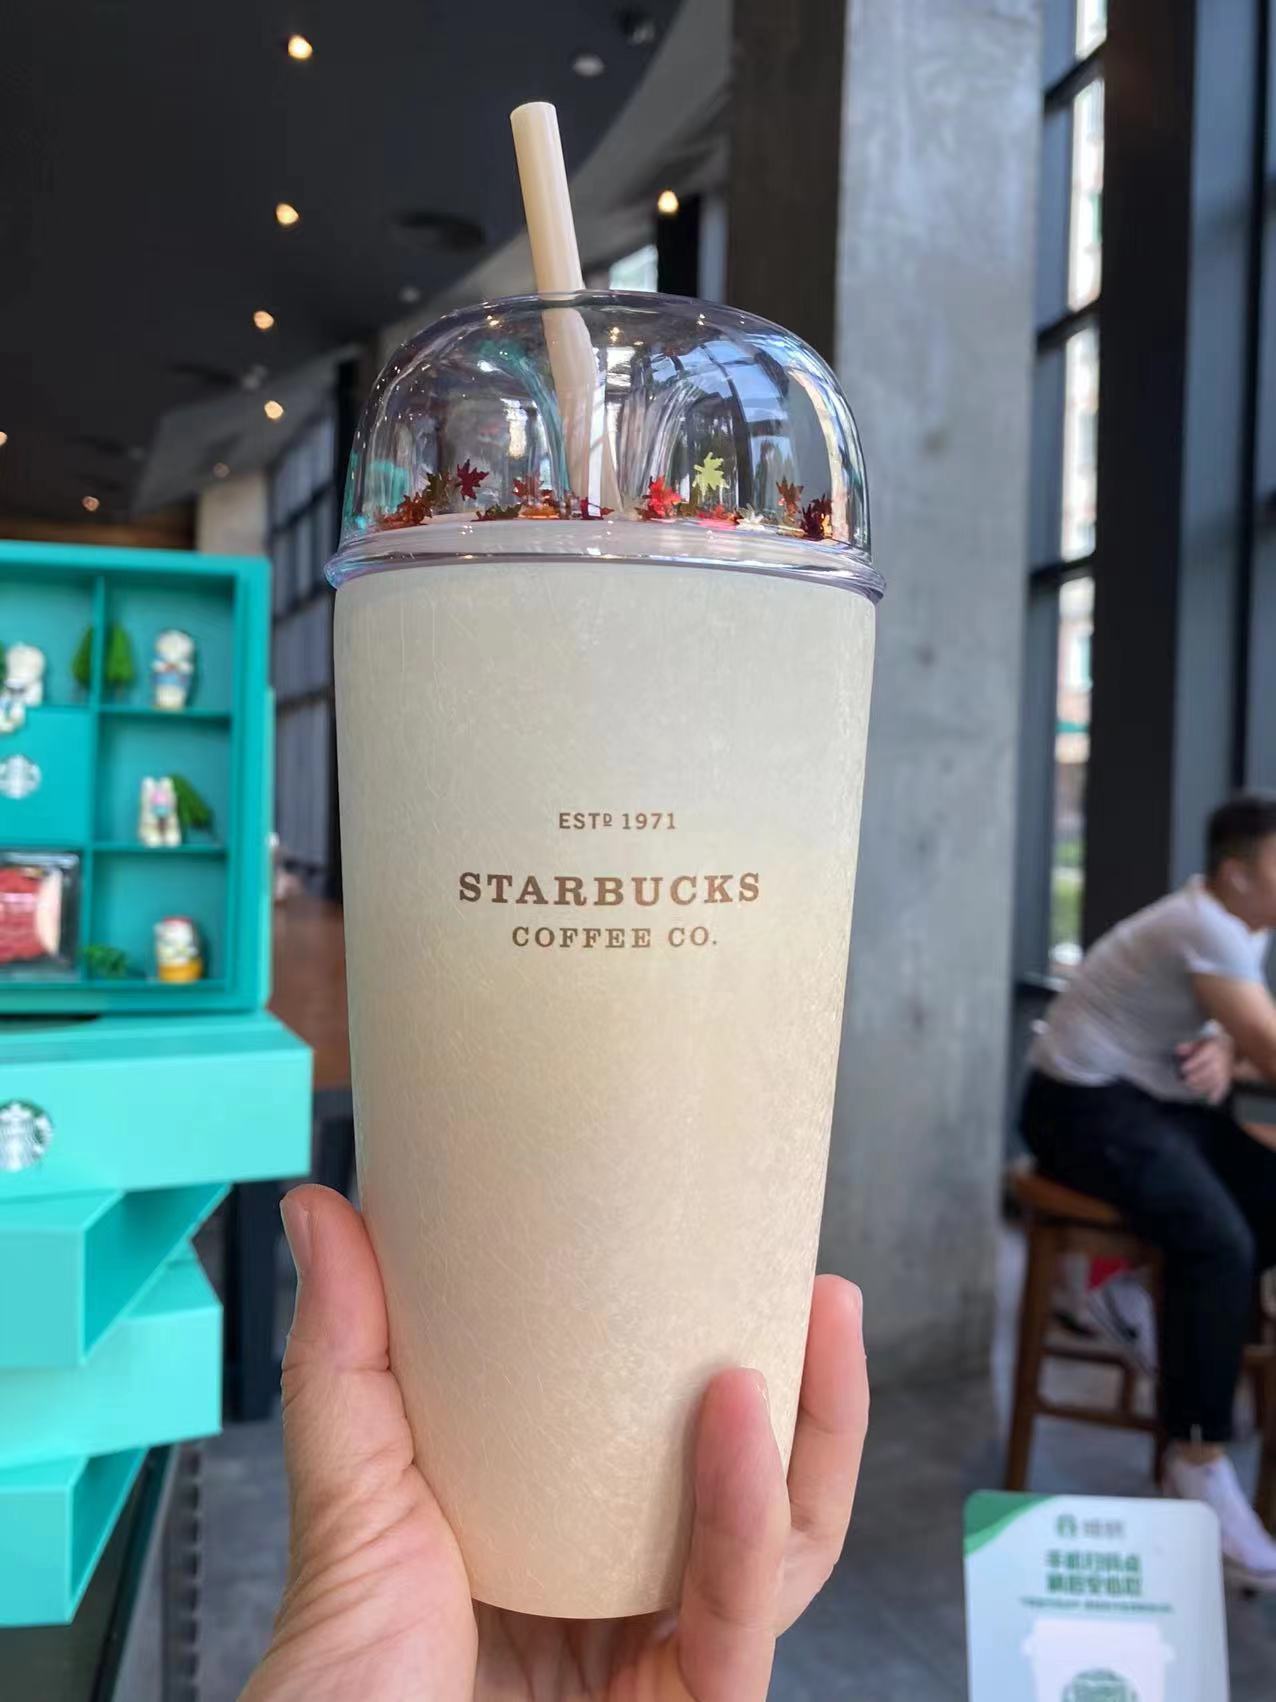 450ml Stainless Steel Starbucks Coffee Cups Tumblers 16oz Starbuck Thermos  Cup Cafe Mugs Thermo Vacuum Tumbler On Sale From Westernfashion, $3.43